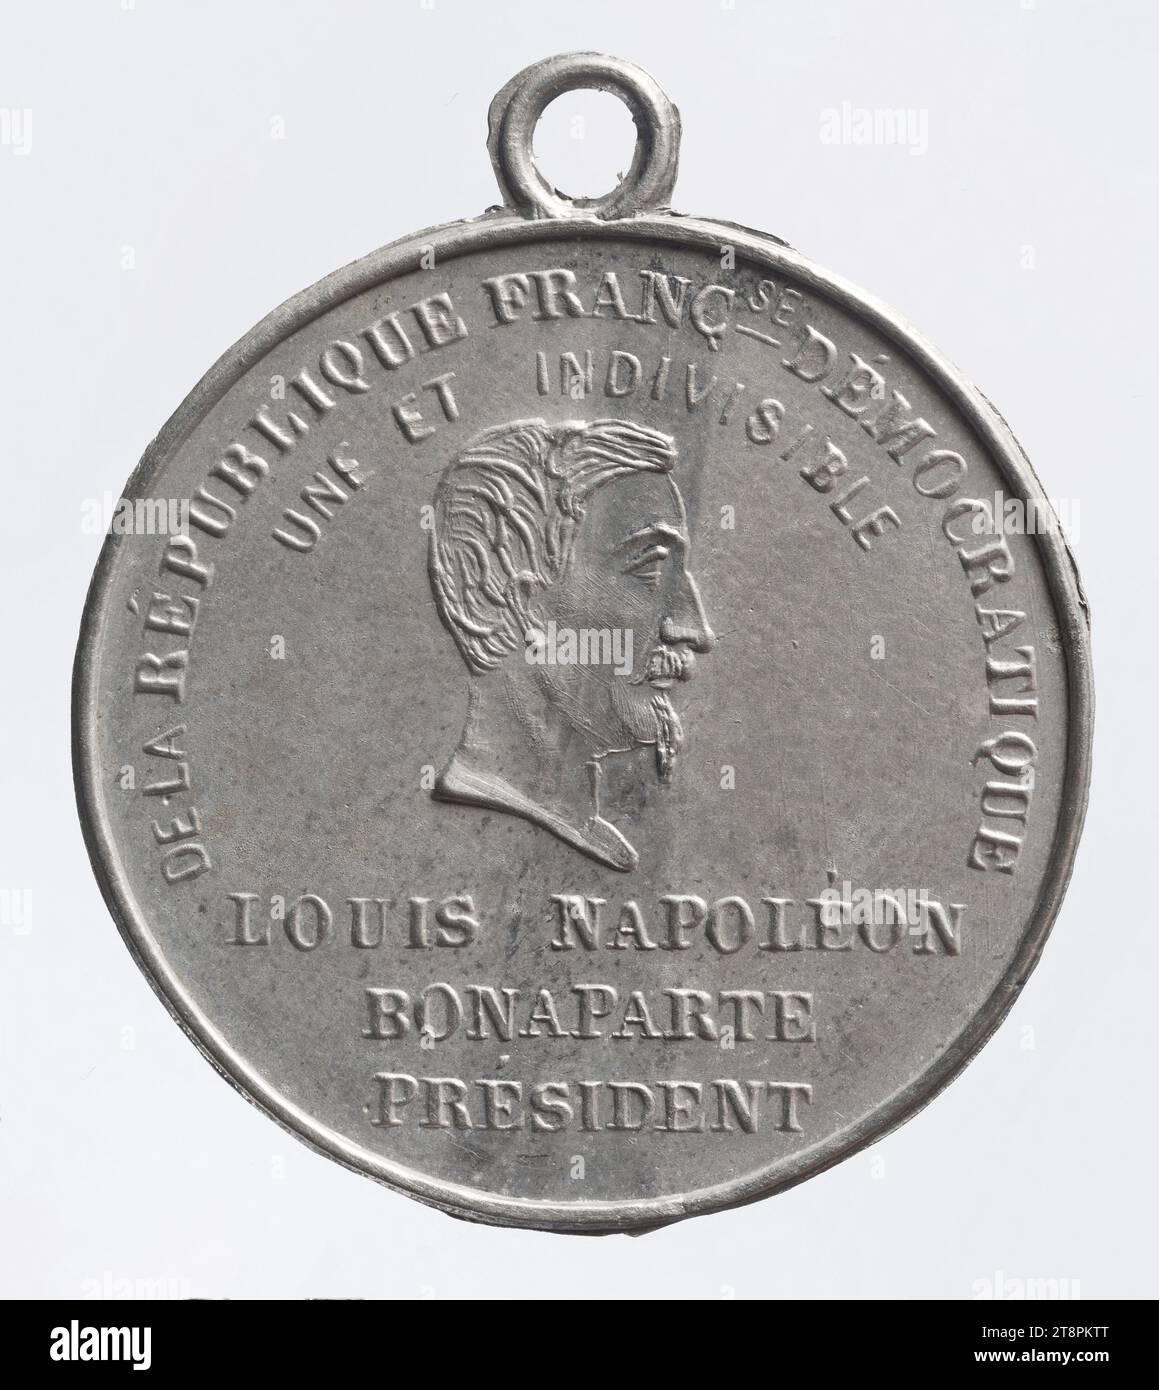 Louis-Napoléon Bonaparte proclaimed President of the French Republic, December 20, 1848, In 1848, Numismatic, Medal, Alloy, Dimensions - Work: Diameter: 3.6 cm, Weight (type dimension): 7.27 g Stock Photo